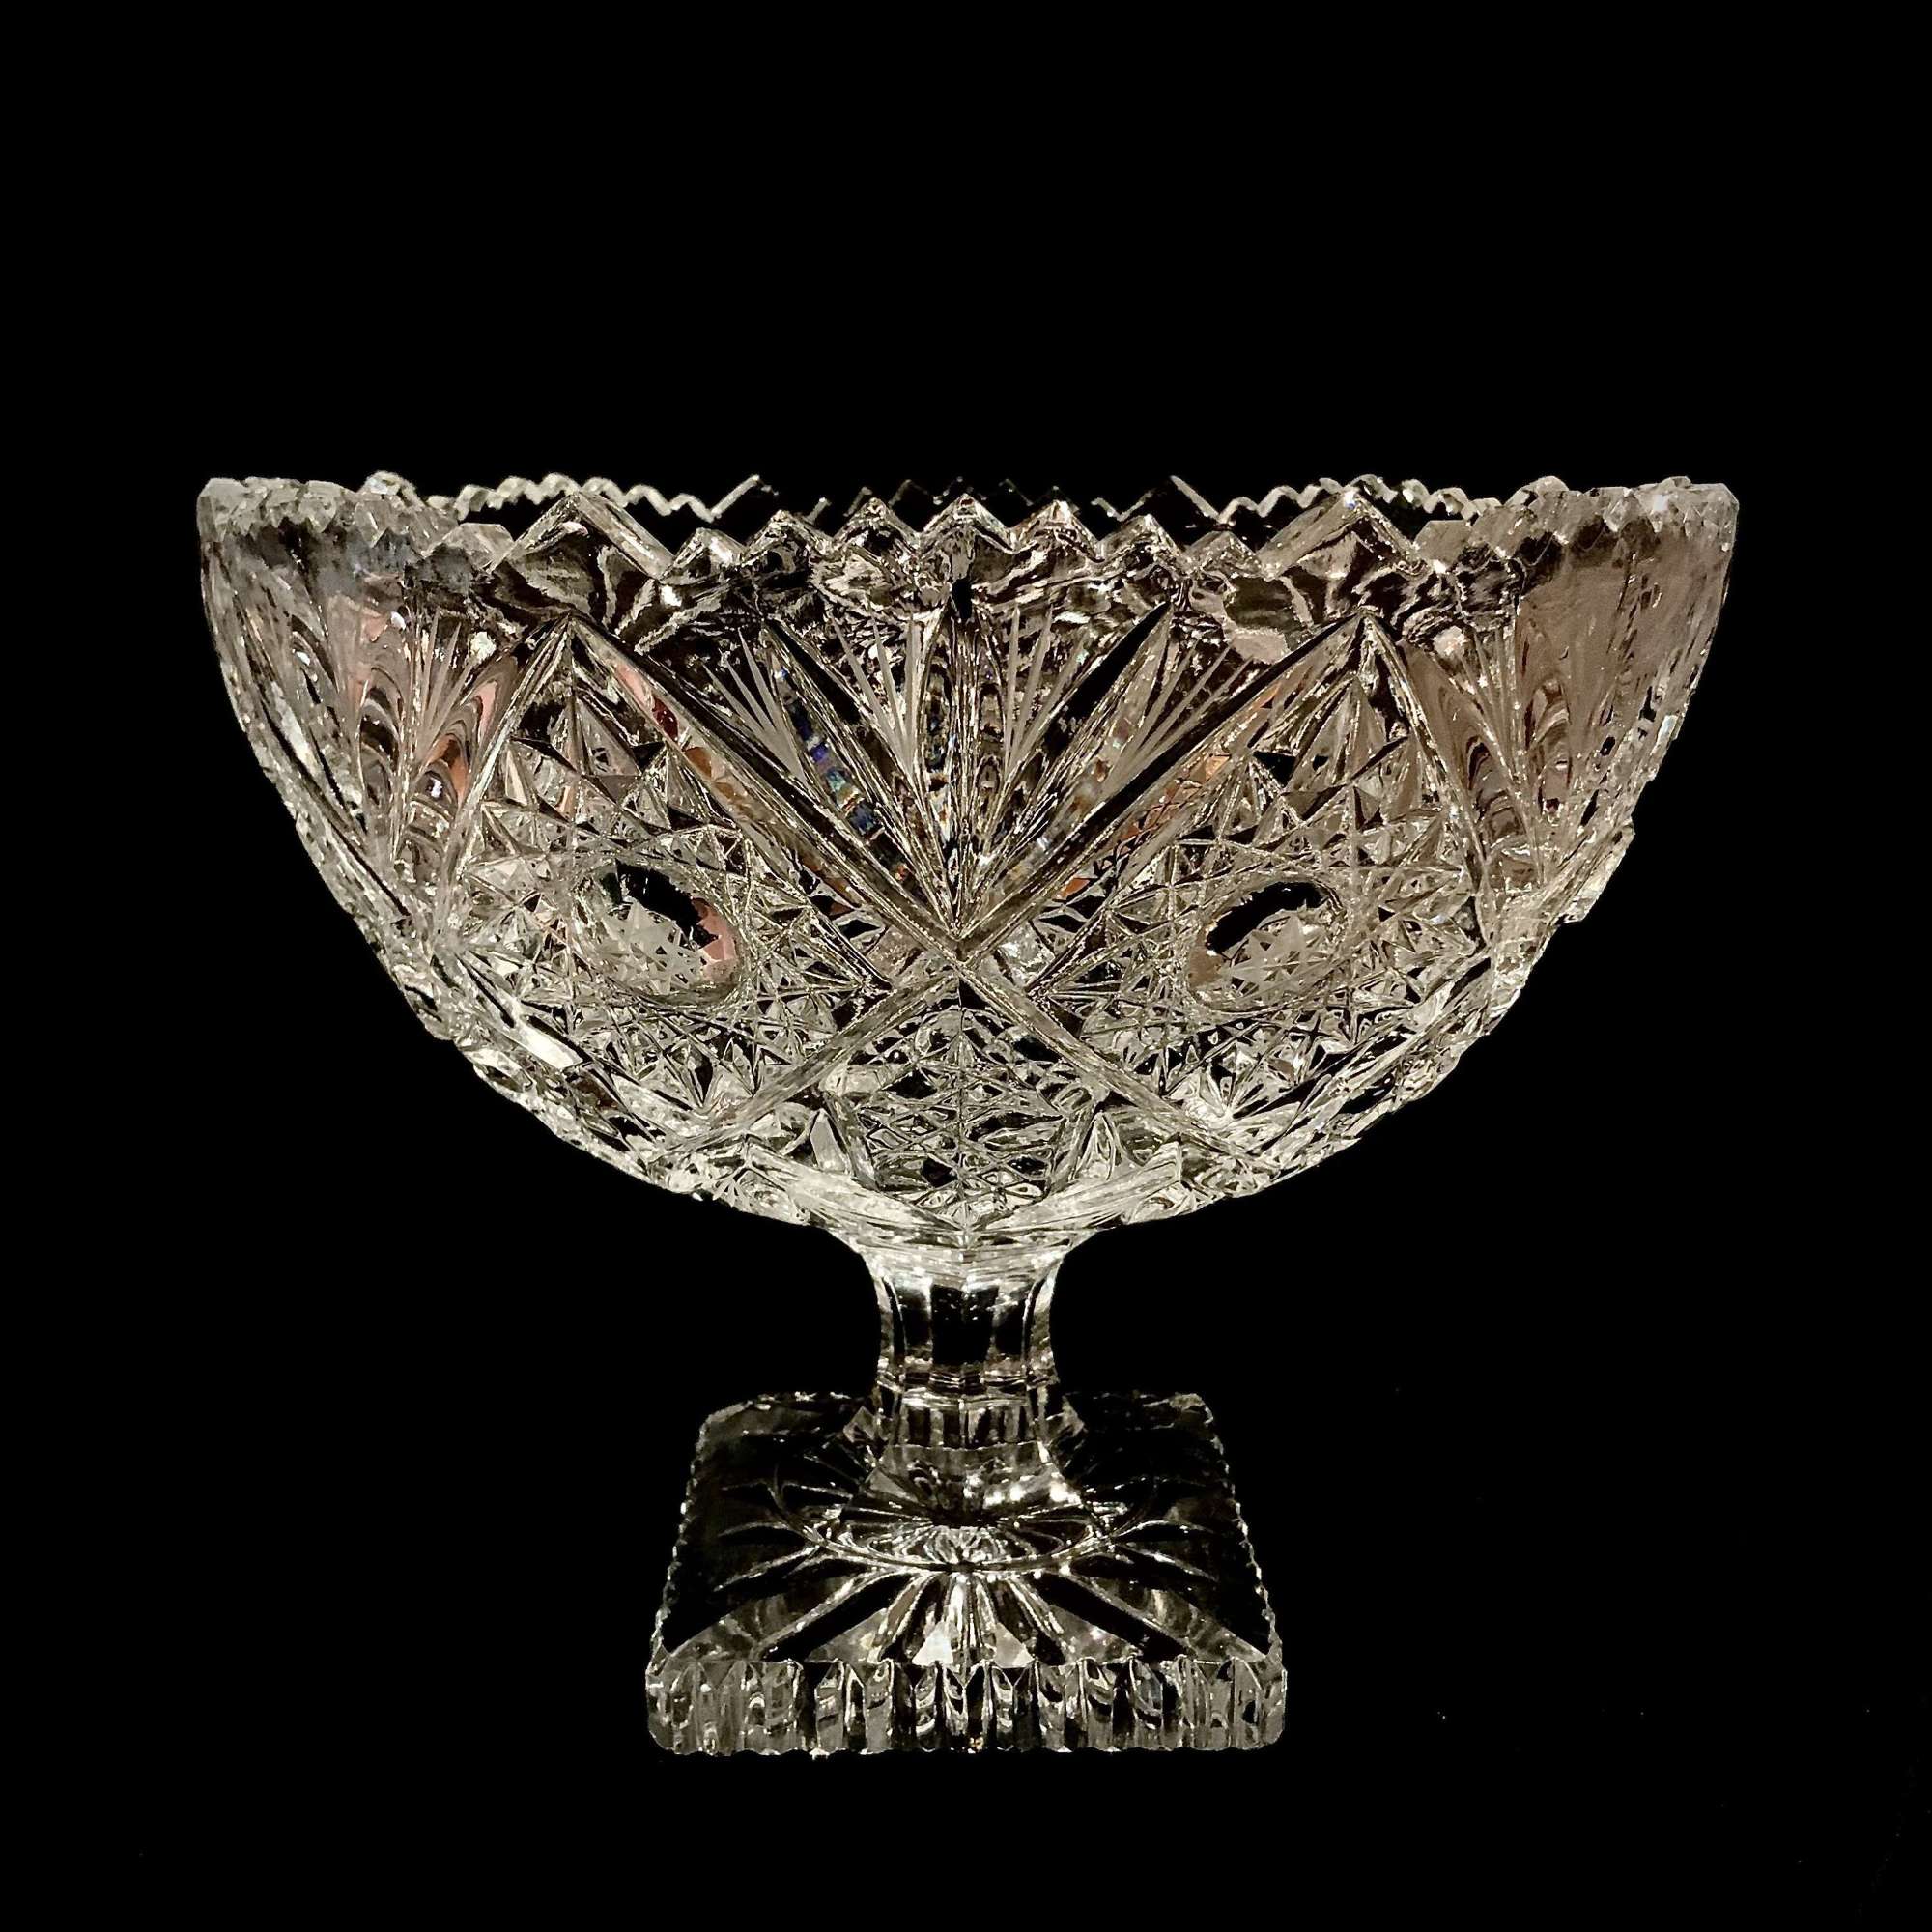 Lead Crystal Cut-Glass Centrepiece Bowl of Good Size